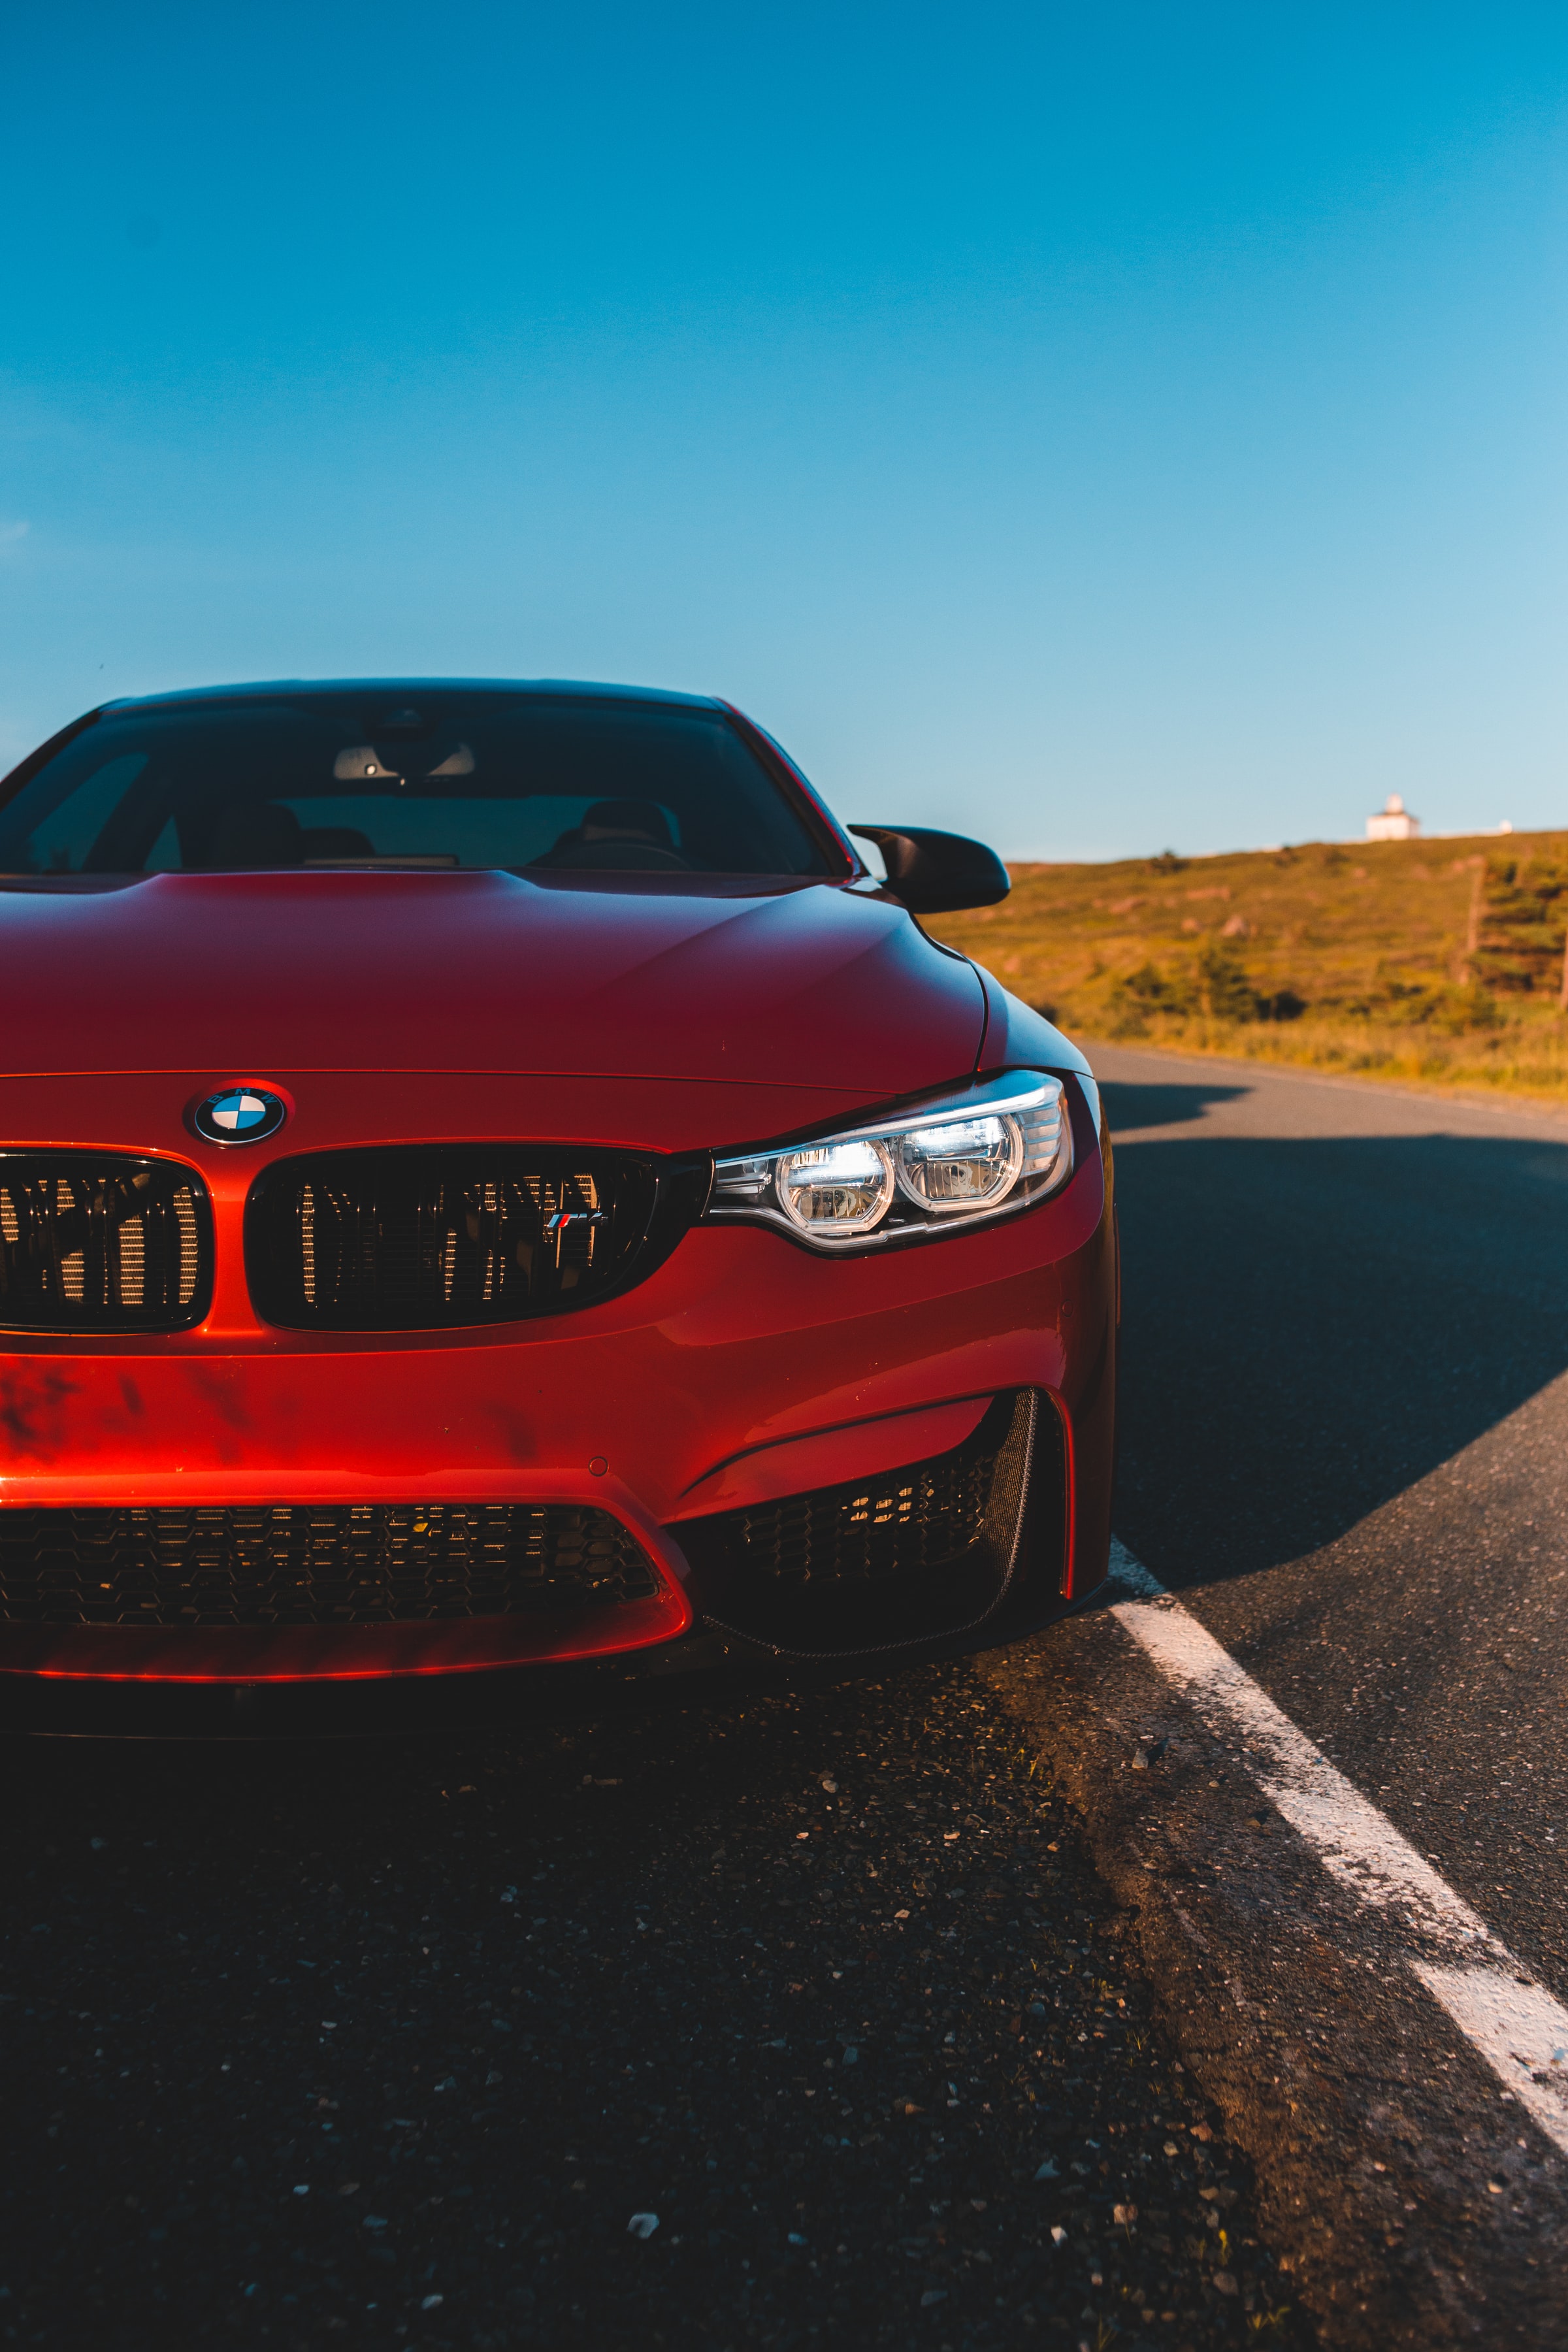 bmw, bmw m4, cars, headlight, red, car, front view 1080p